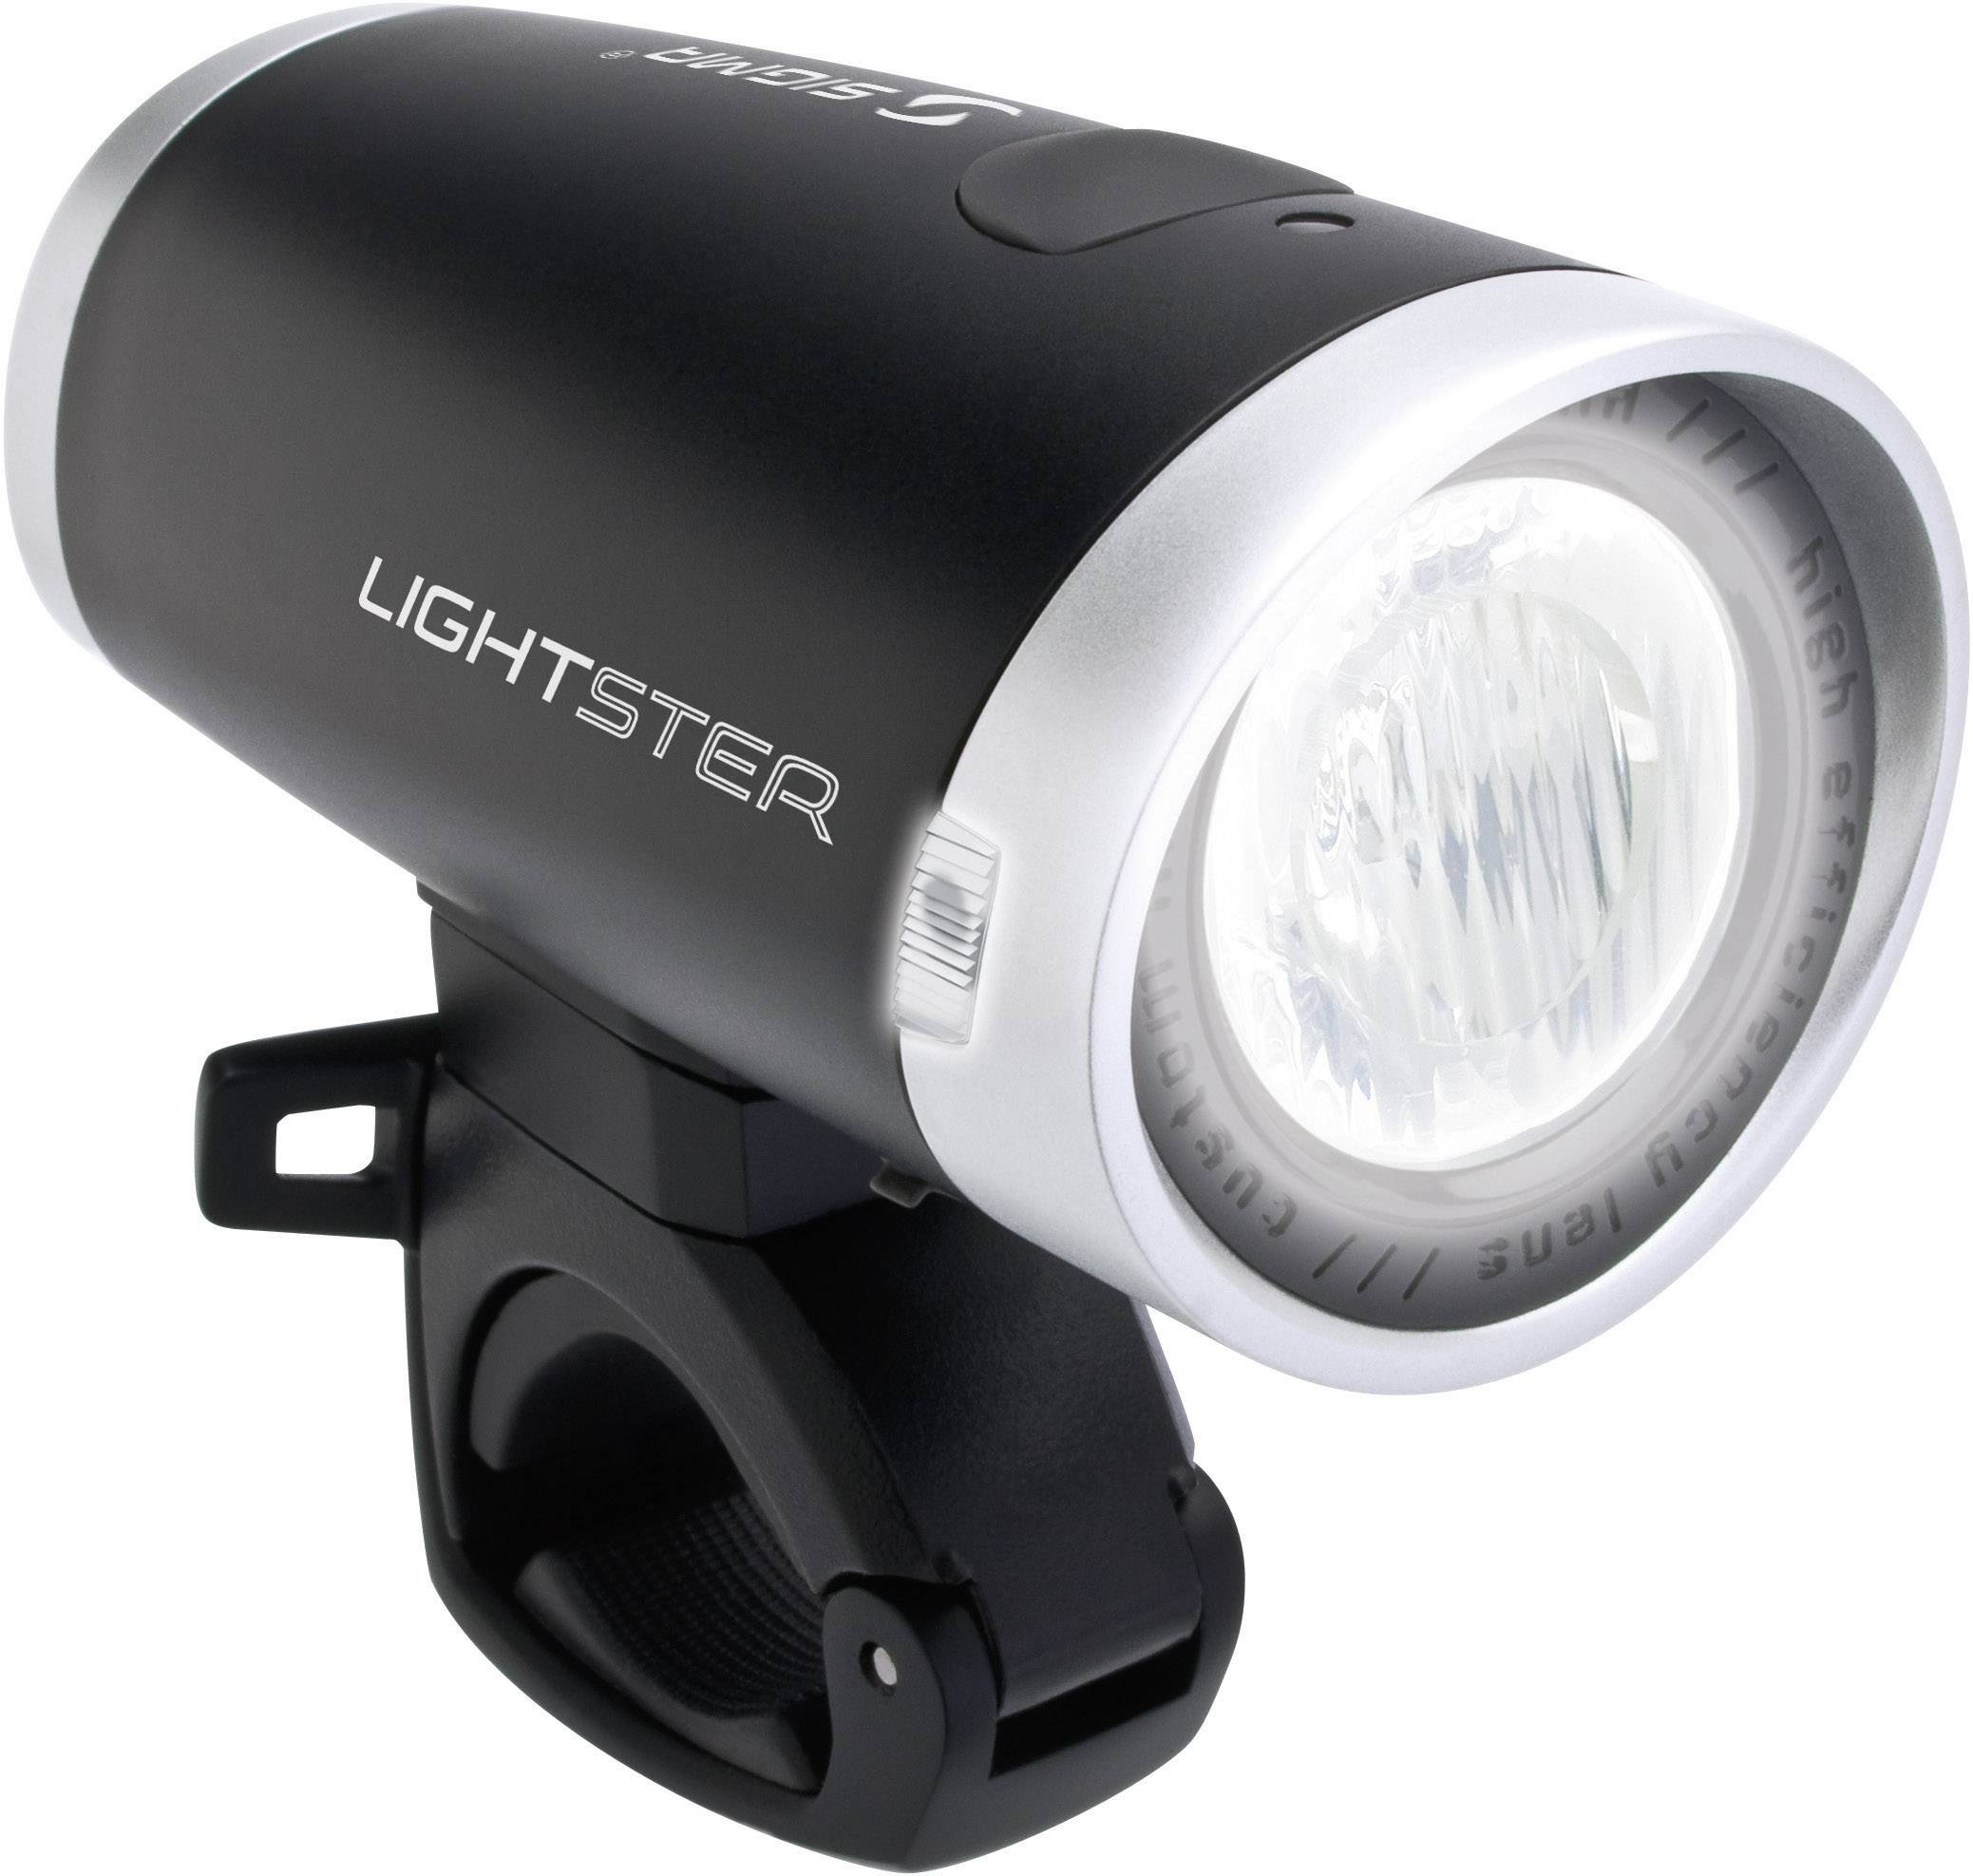 Sigma light set Lightster, Cuberider ll LED (monochrome) rechargeable, battery-powered Silver | Conrad.com